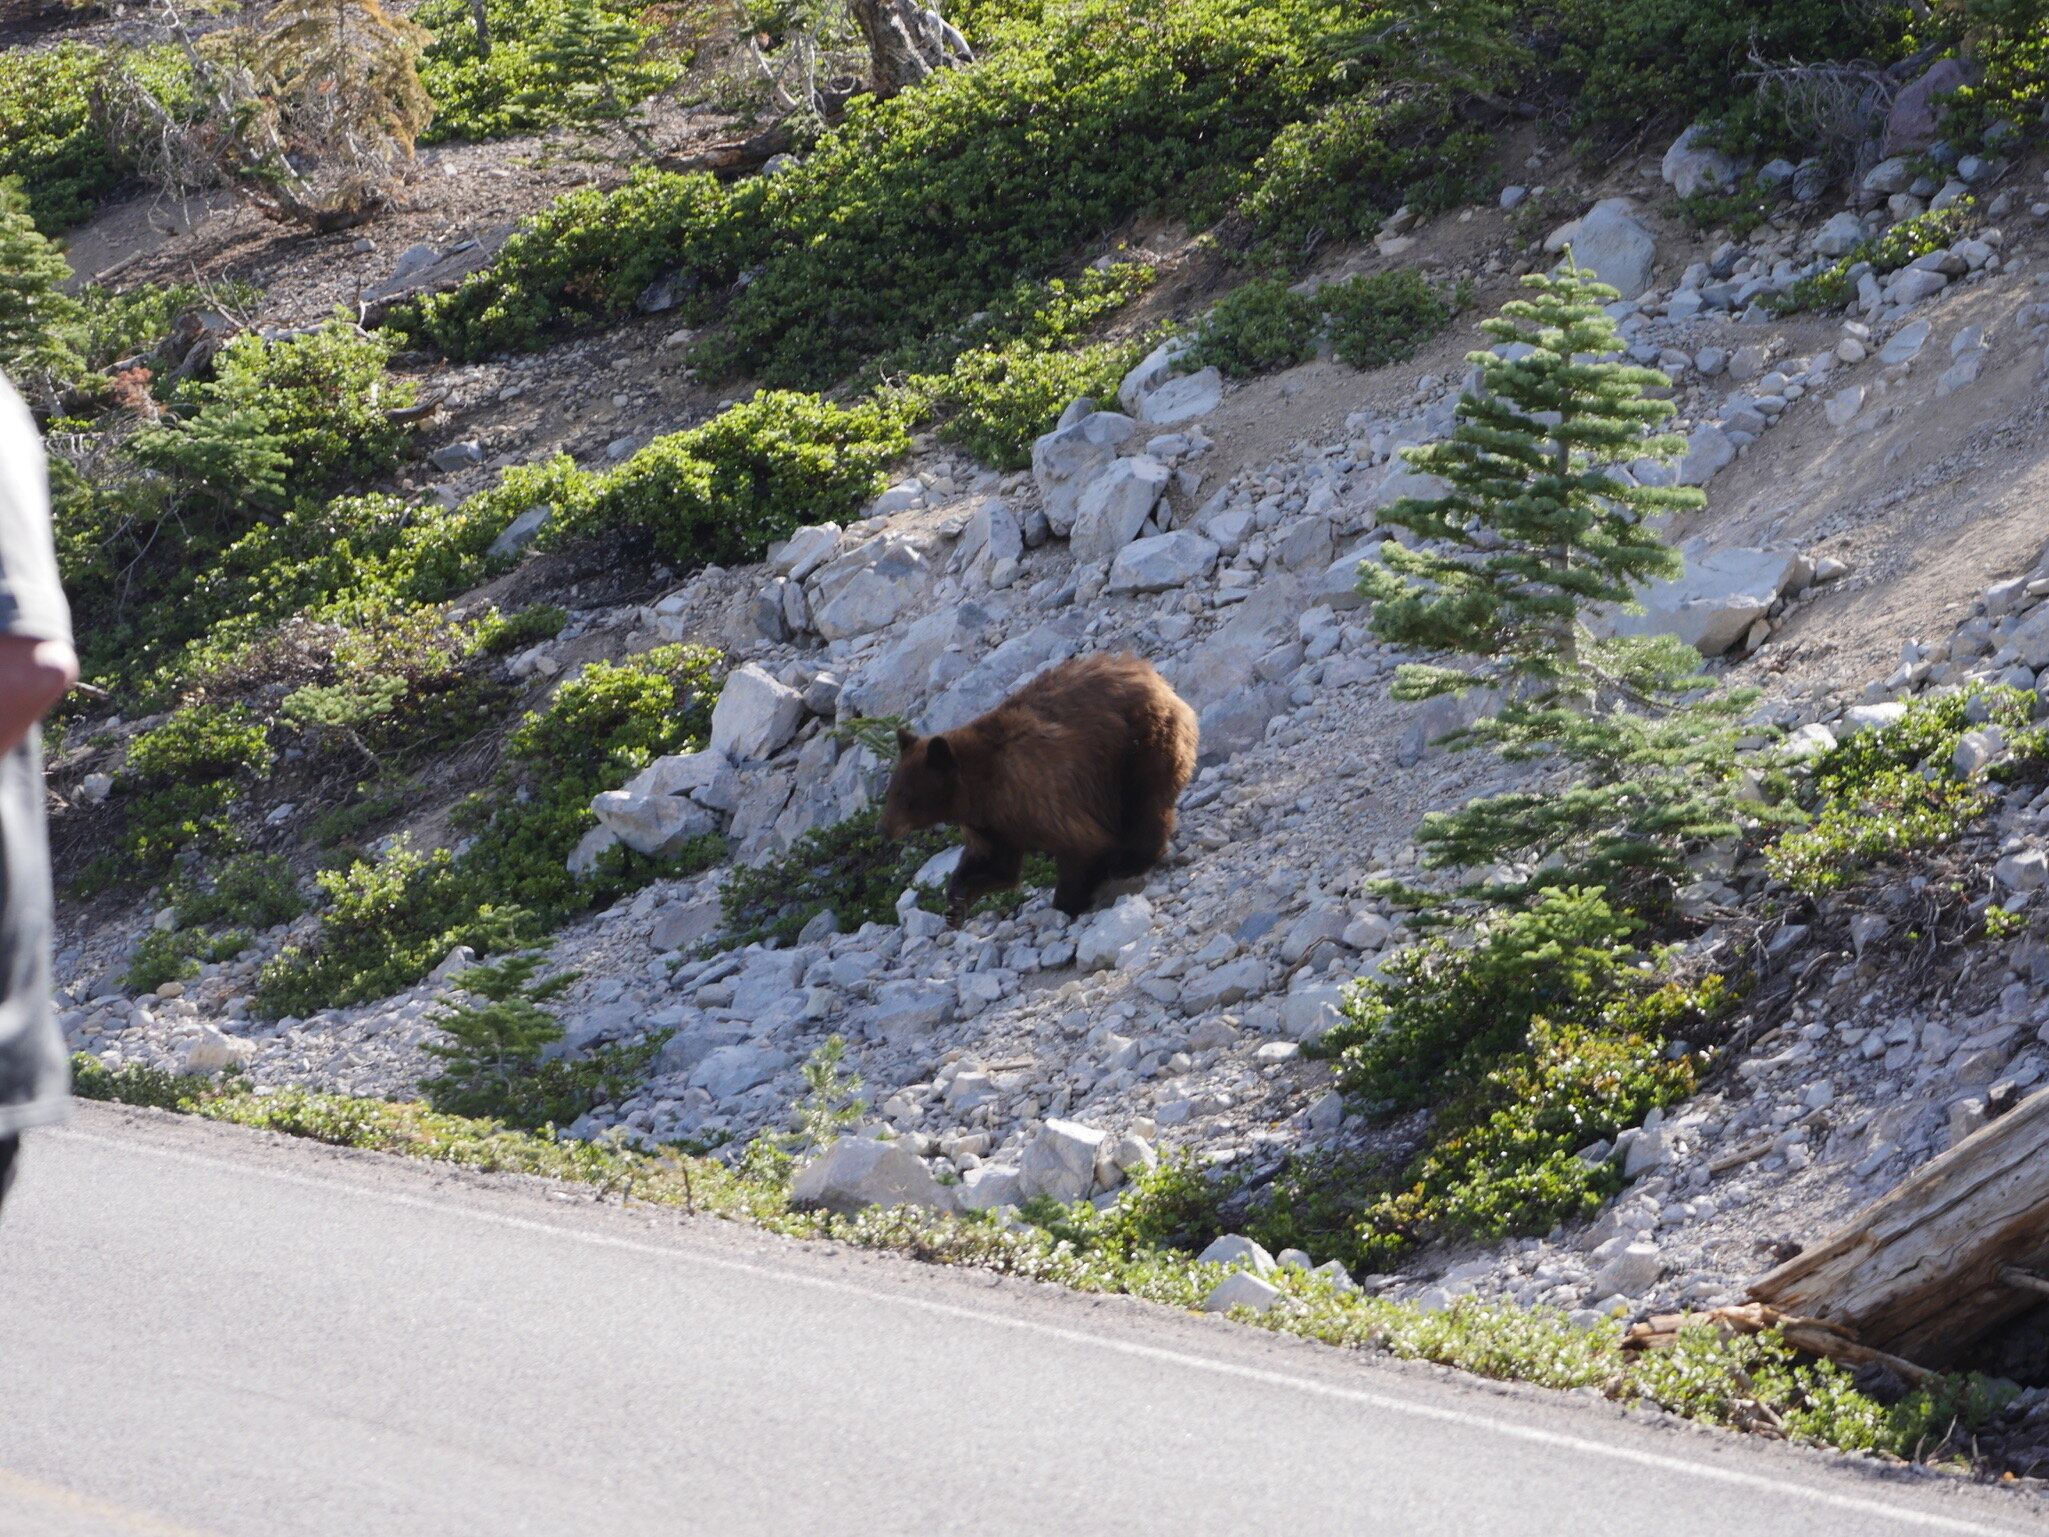 Photo 7 - Bear coming down the slope prepares to hop down into the ditch and then up onto the road to cross.  Photo by Jude Boudreaux, 6/5/21